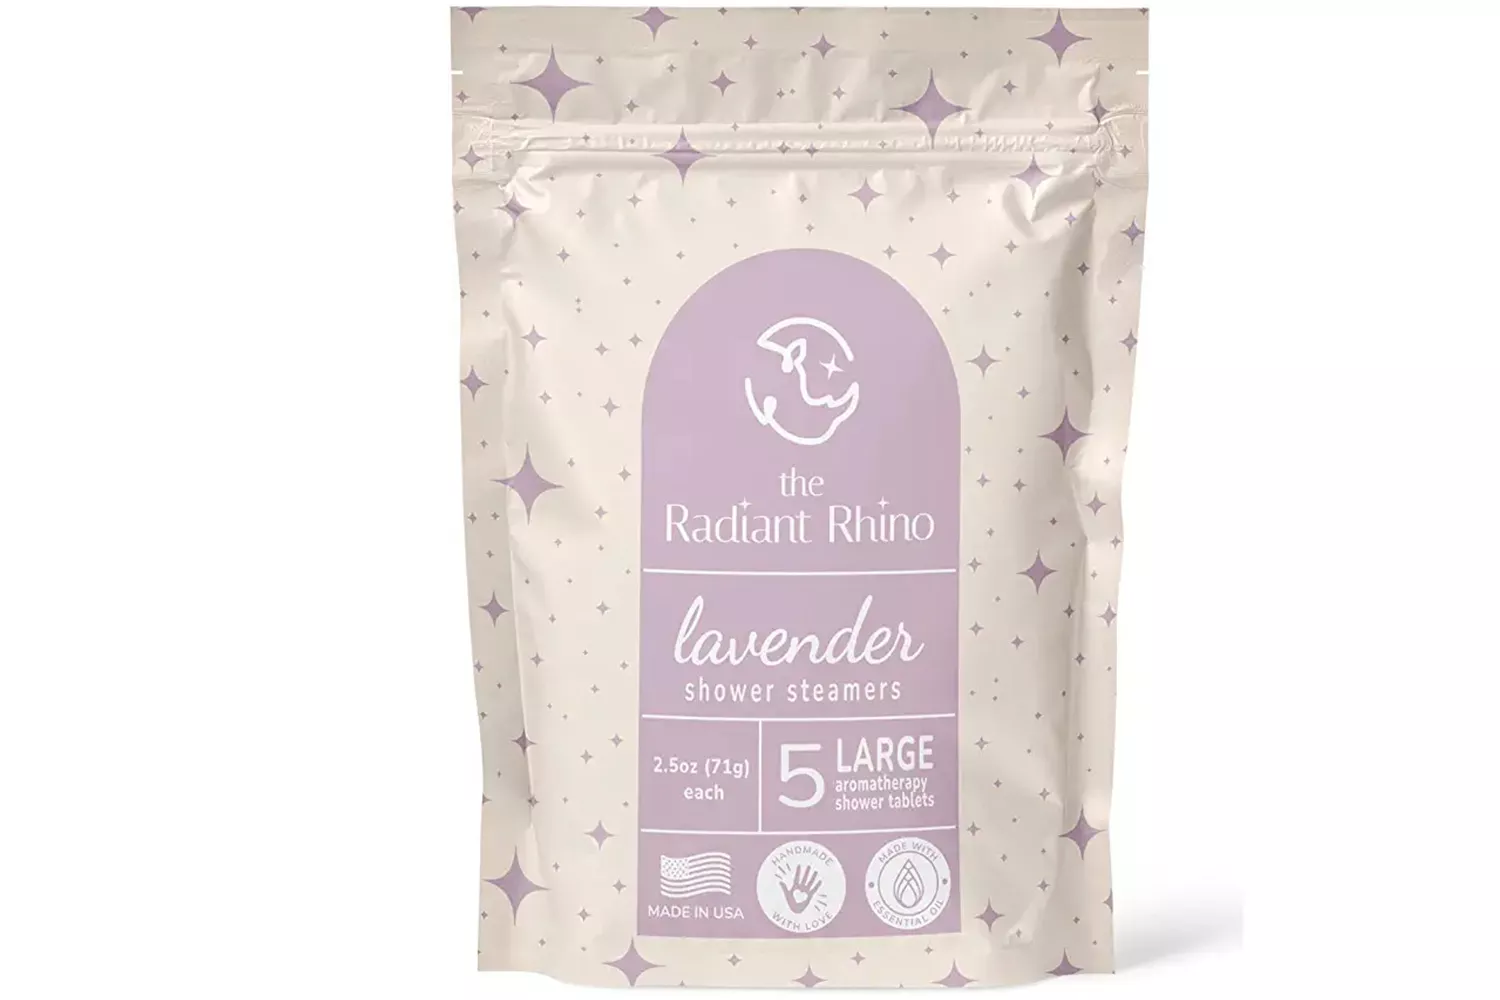 The Radiant Rhino Lavender Shower Steamers